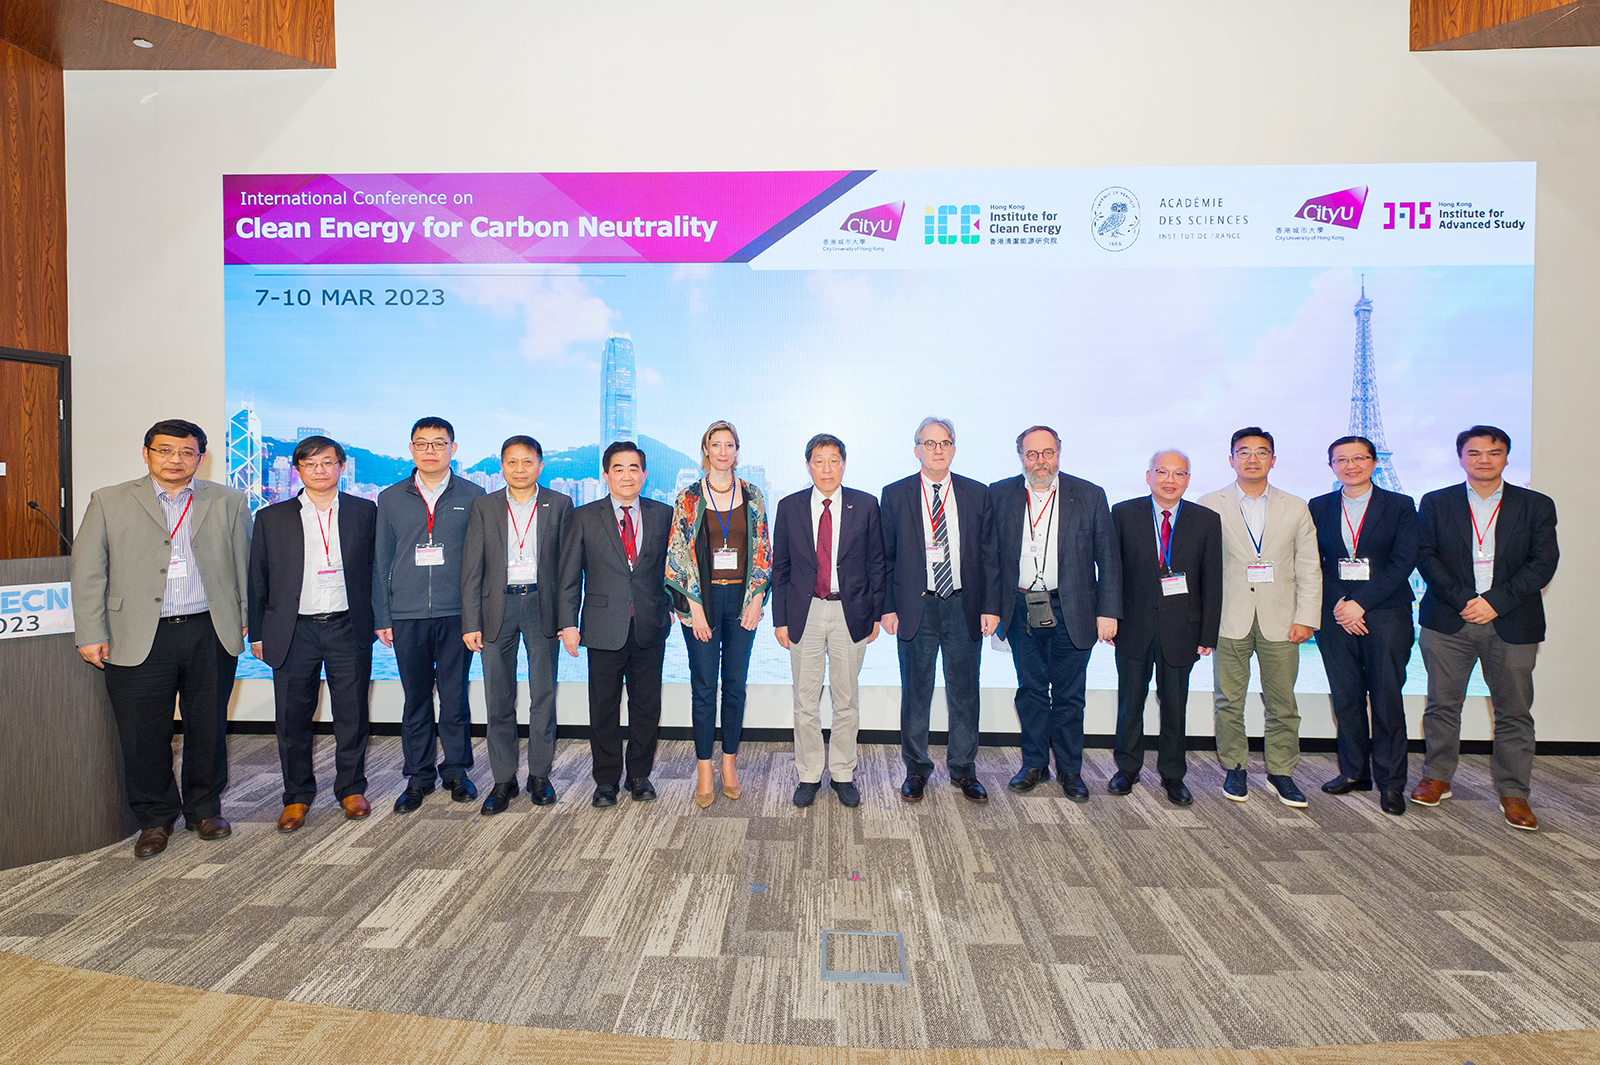 President Kuo (middle), Mrs Drulhe (6th from the left), Professor Jen (5th from the left) and Professor Fontecave (6th from the right) attend the opening ceremony of the International Conference on Clean Energy for Carbon Neutrality.